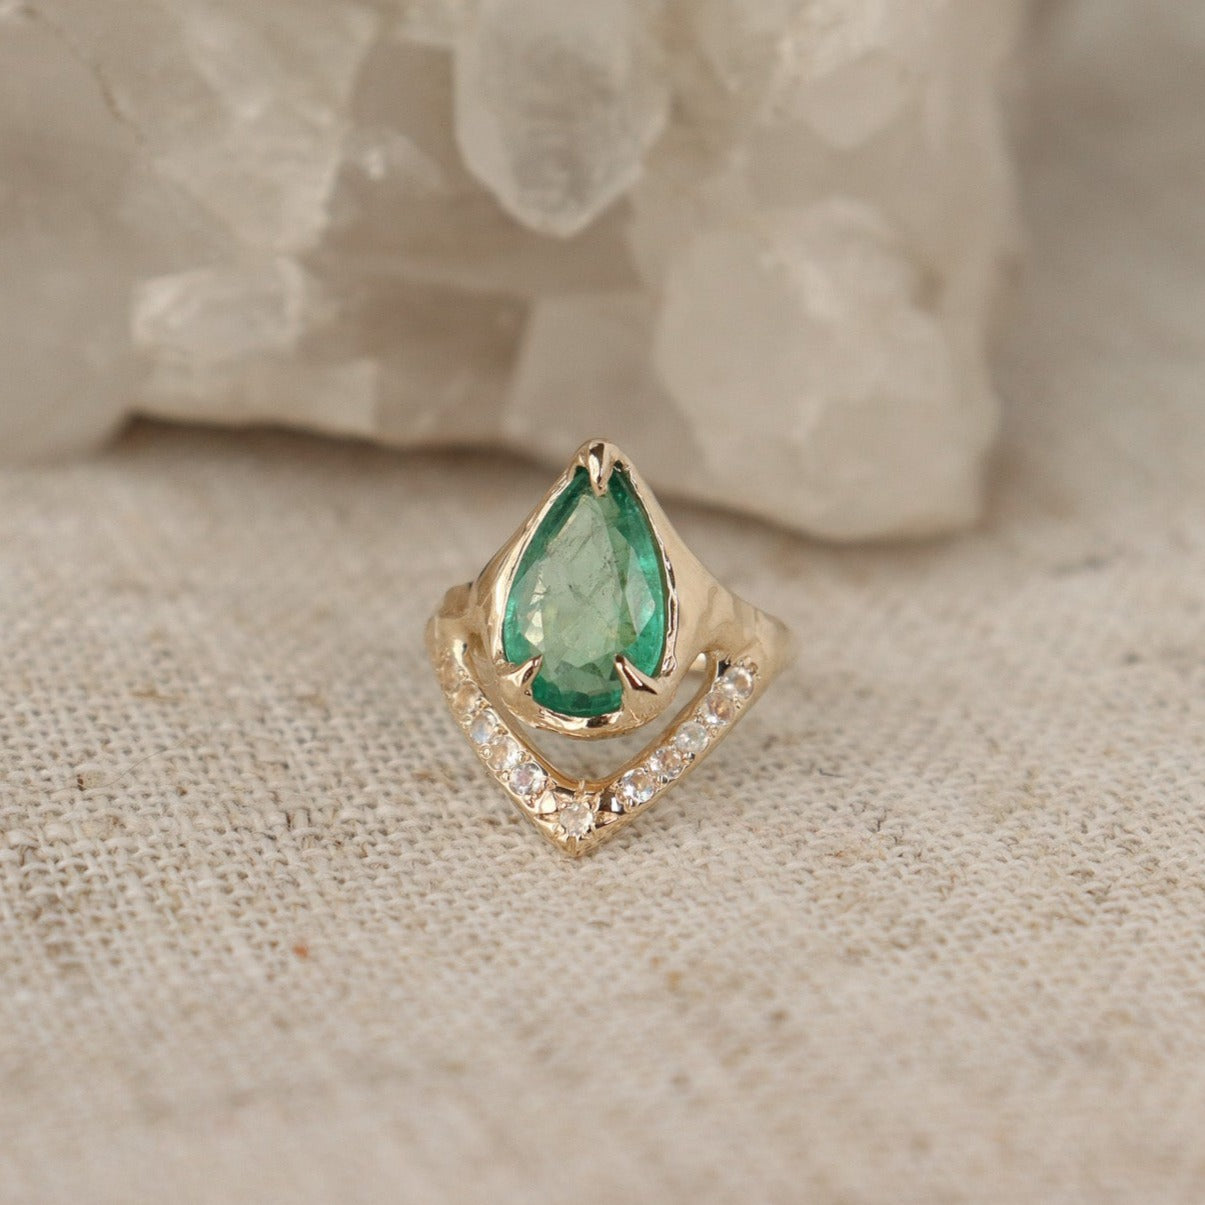 Front view of a pear shaped emerald is set with prongs and has a V-shape band under the stone with moonstones.